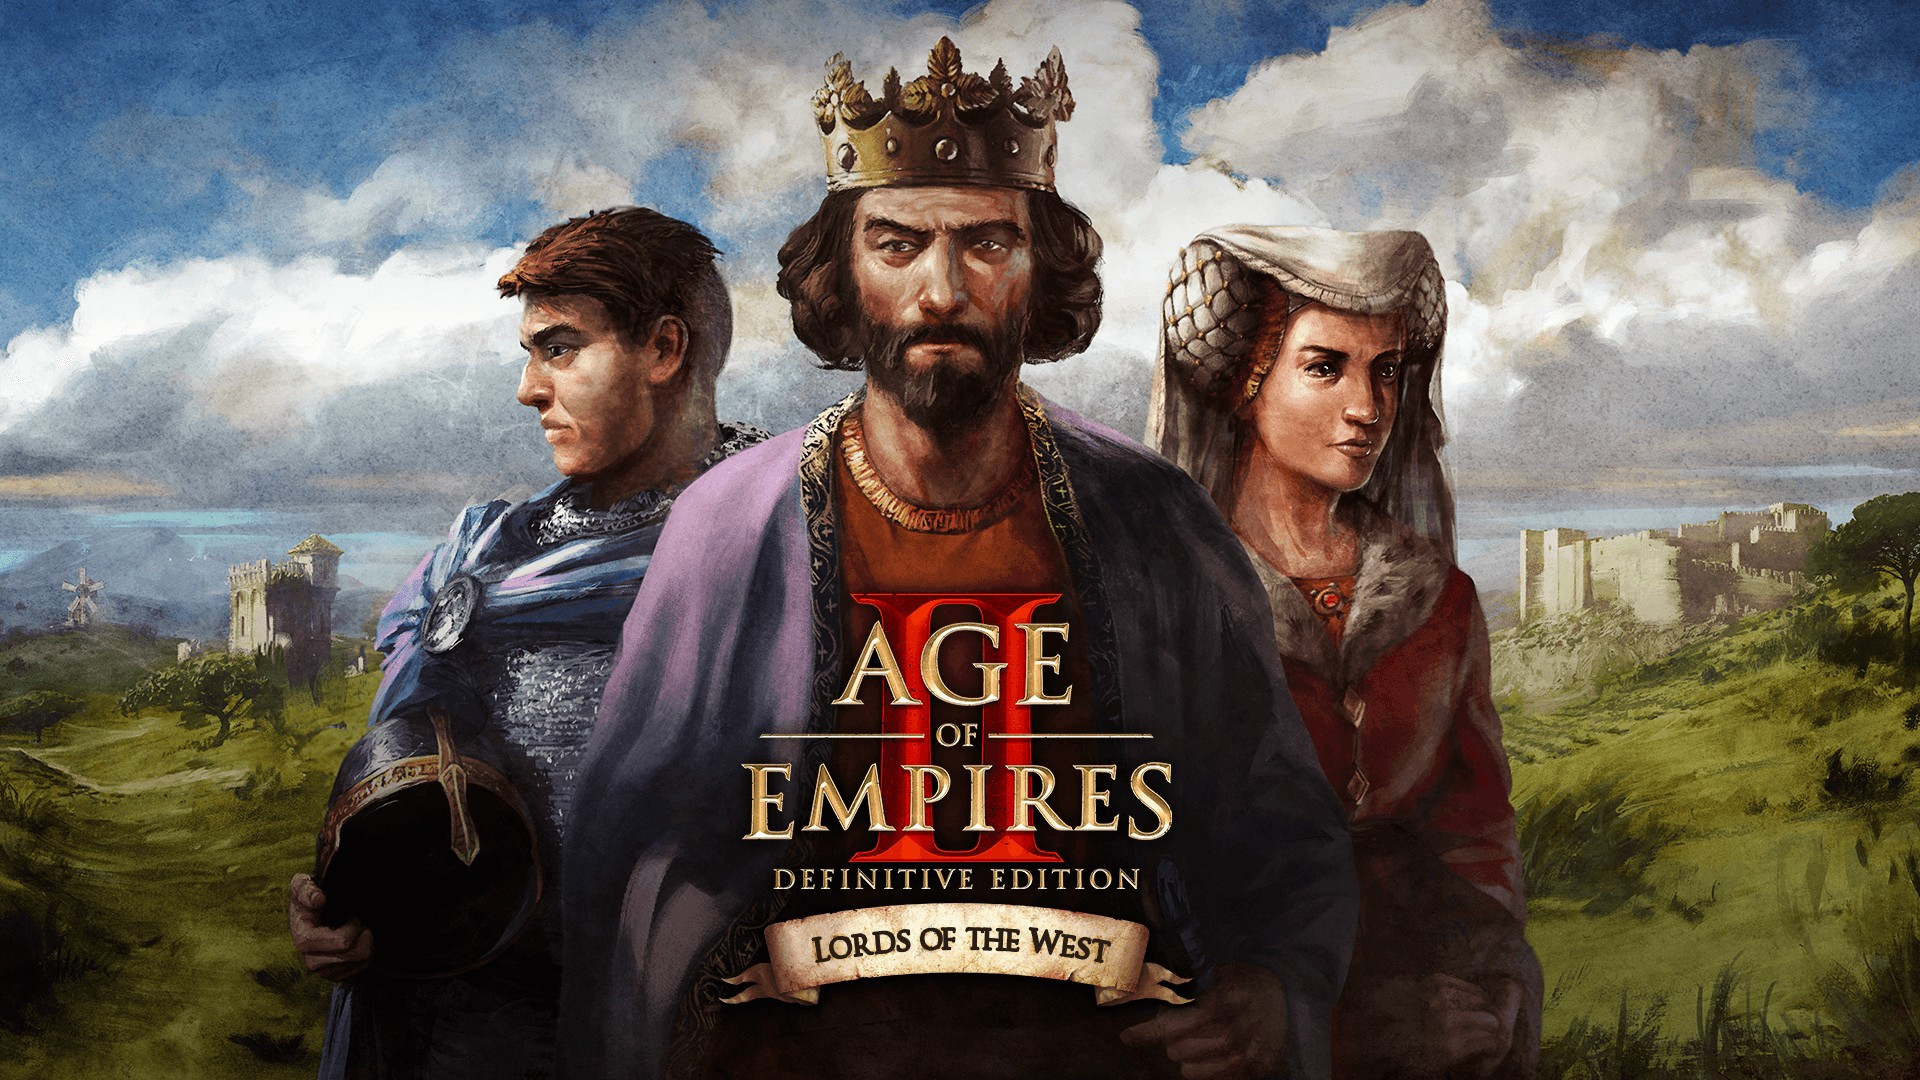 The Lords Of The West Have Arrived In Age of Empires II: Definitive Edition – Available Now